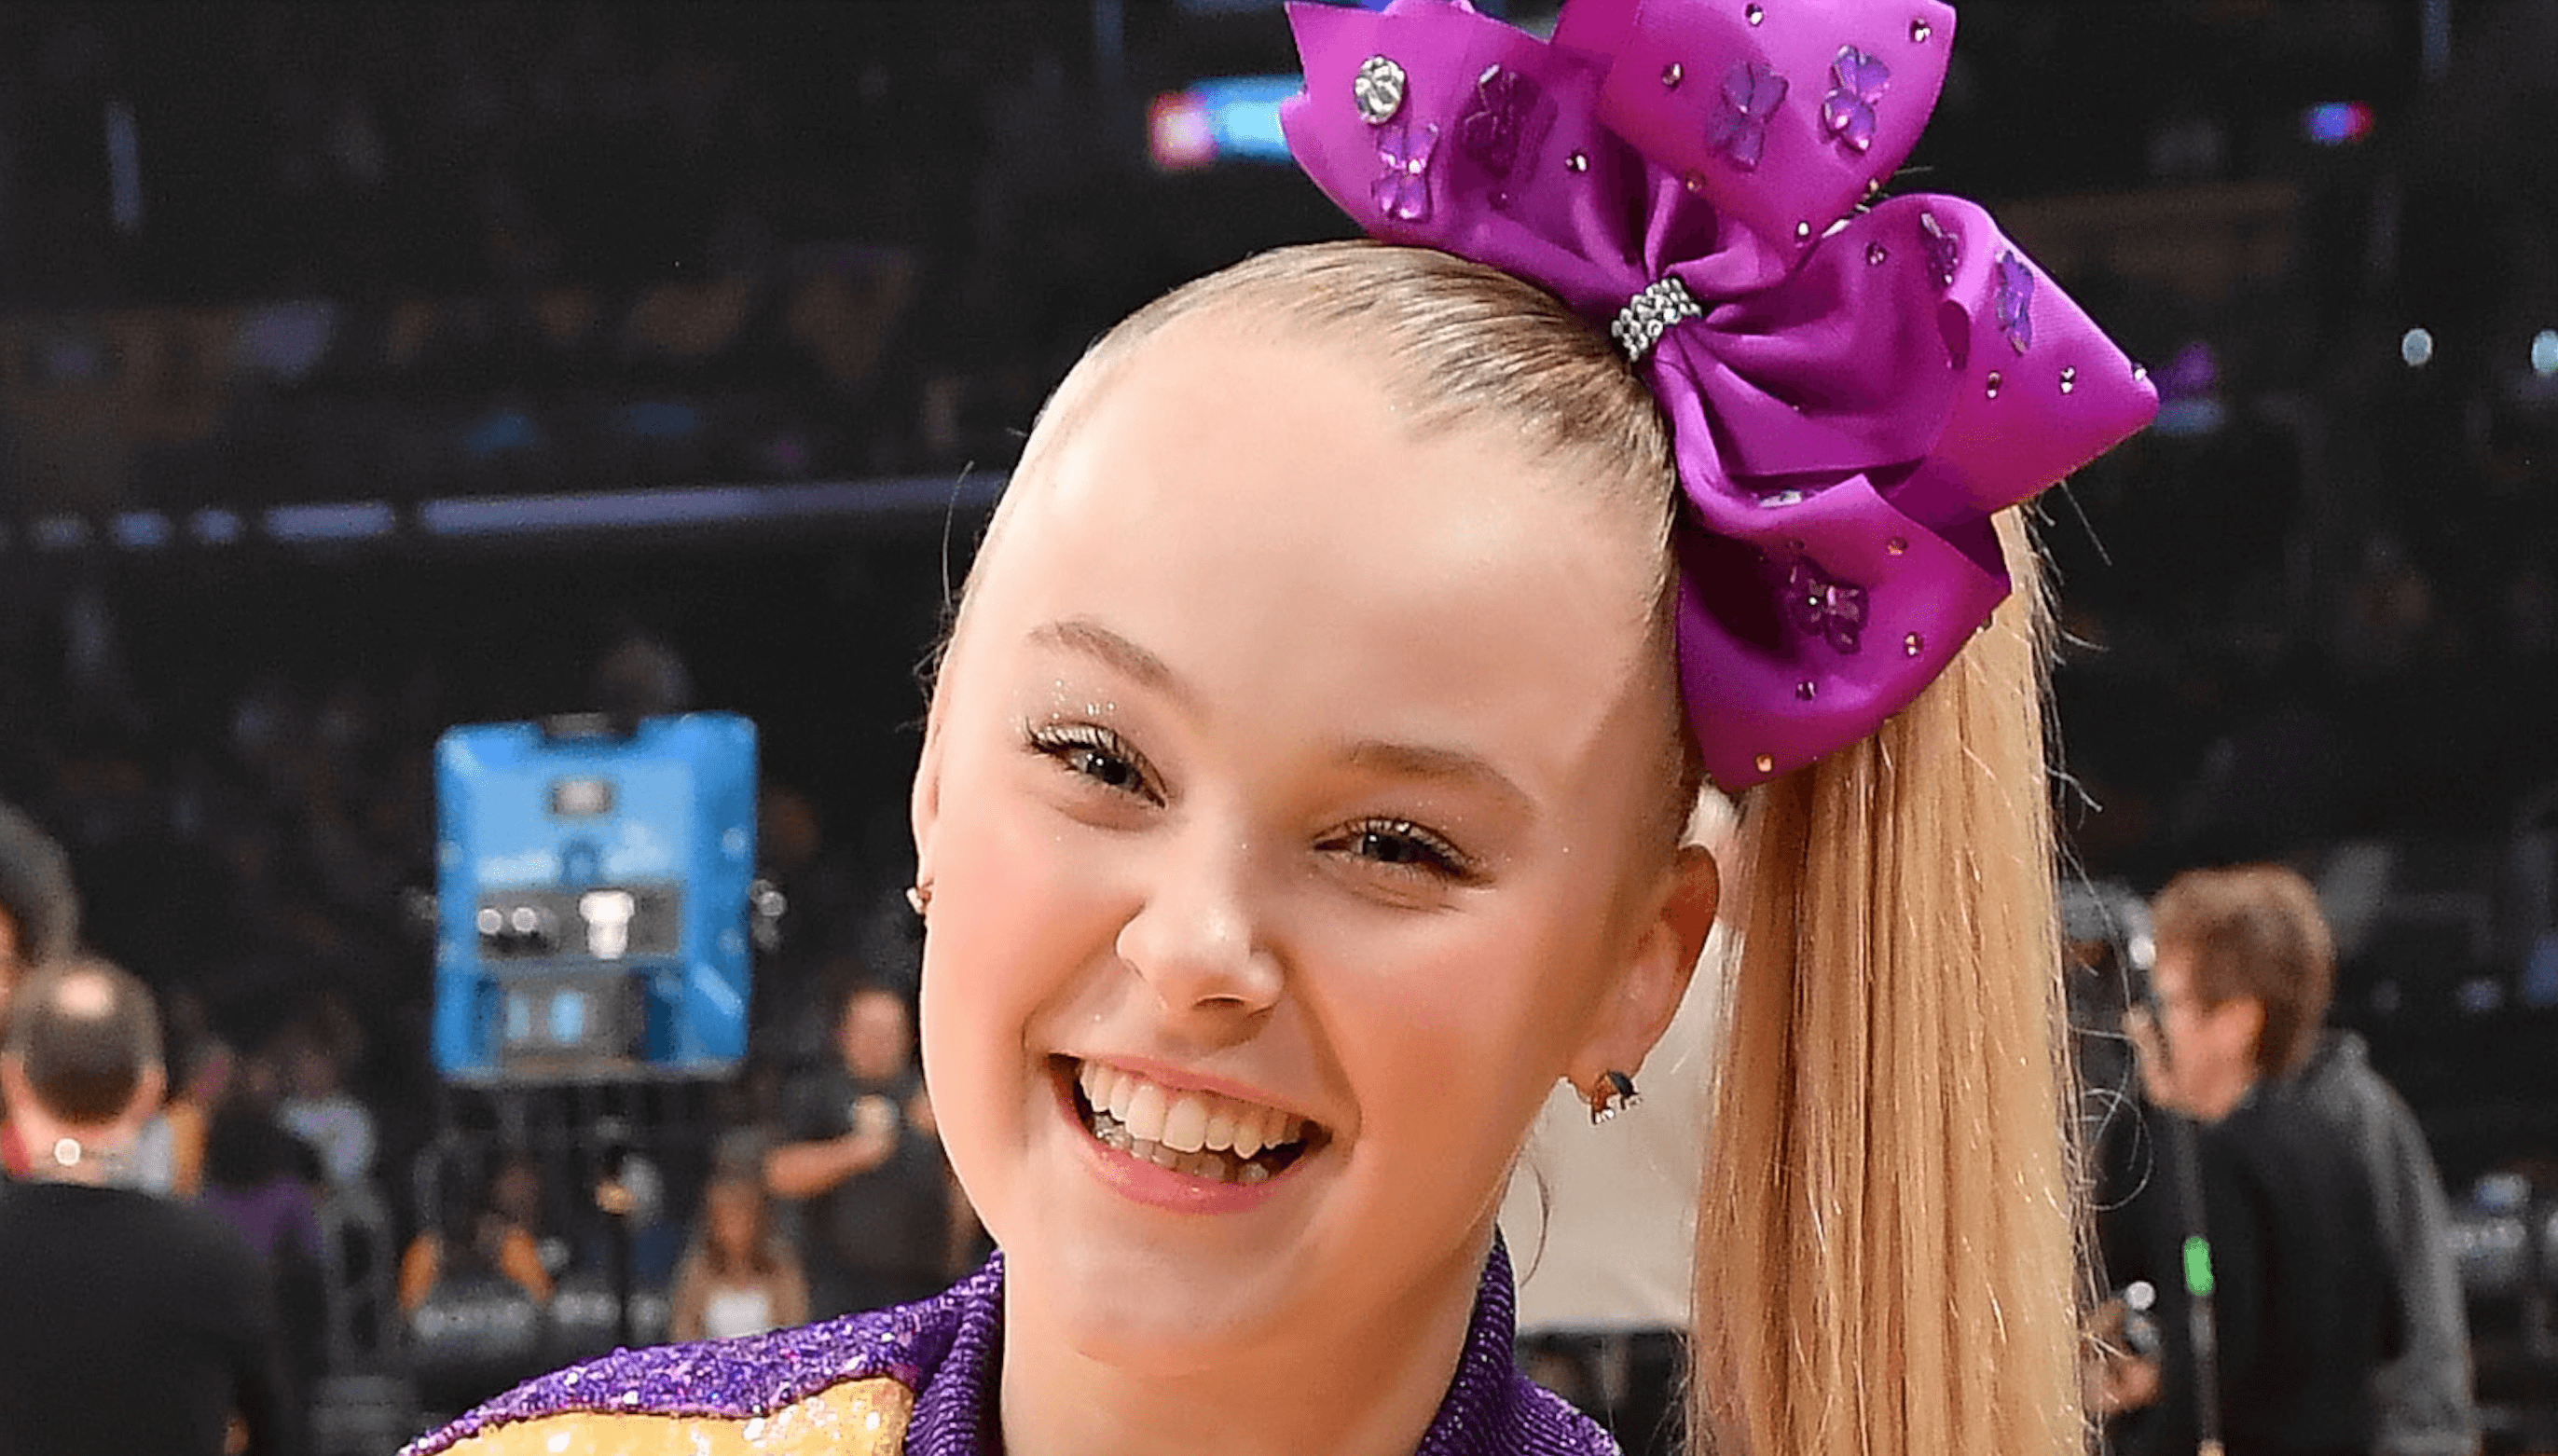 JoJo Siwa’s Pride Party Ends Abruptly… Cops Called After Guest OD’s On LSD!